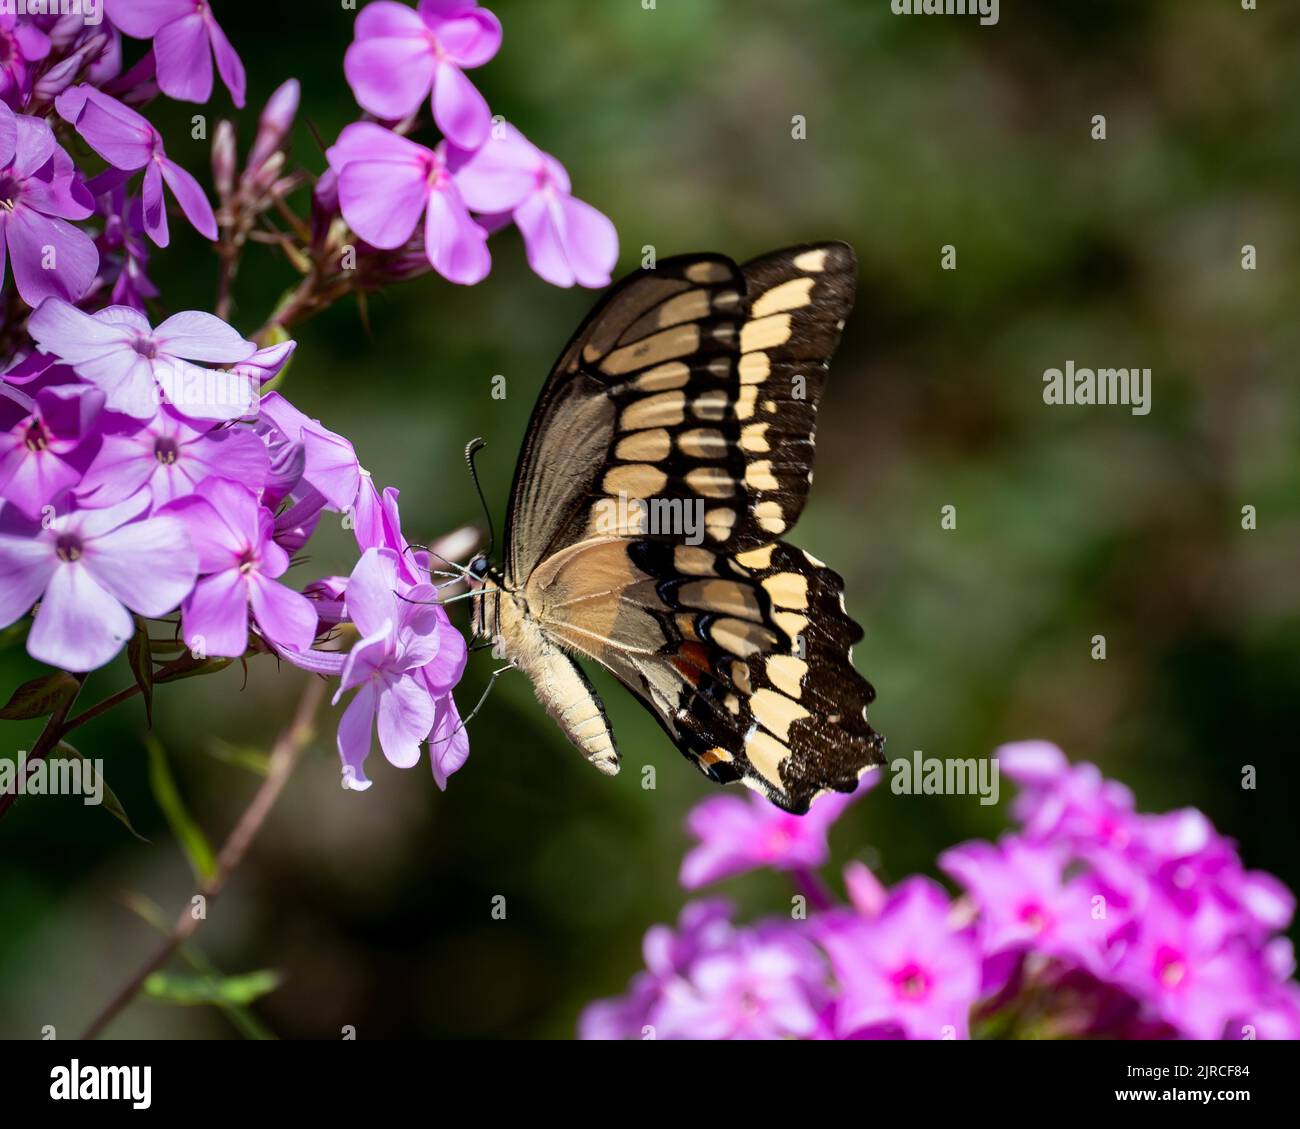 A giant swallowtail butterfly, Papilio cresphontes, pollinating pink phlox flowers in a garden in Speculator, NY USA Stock Photo